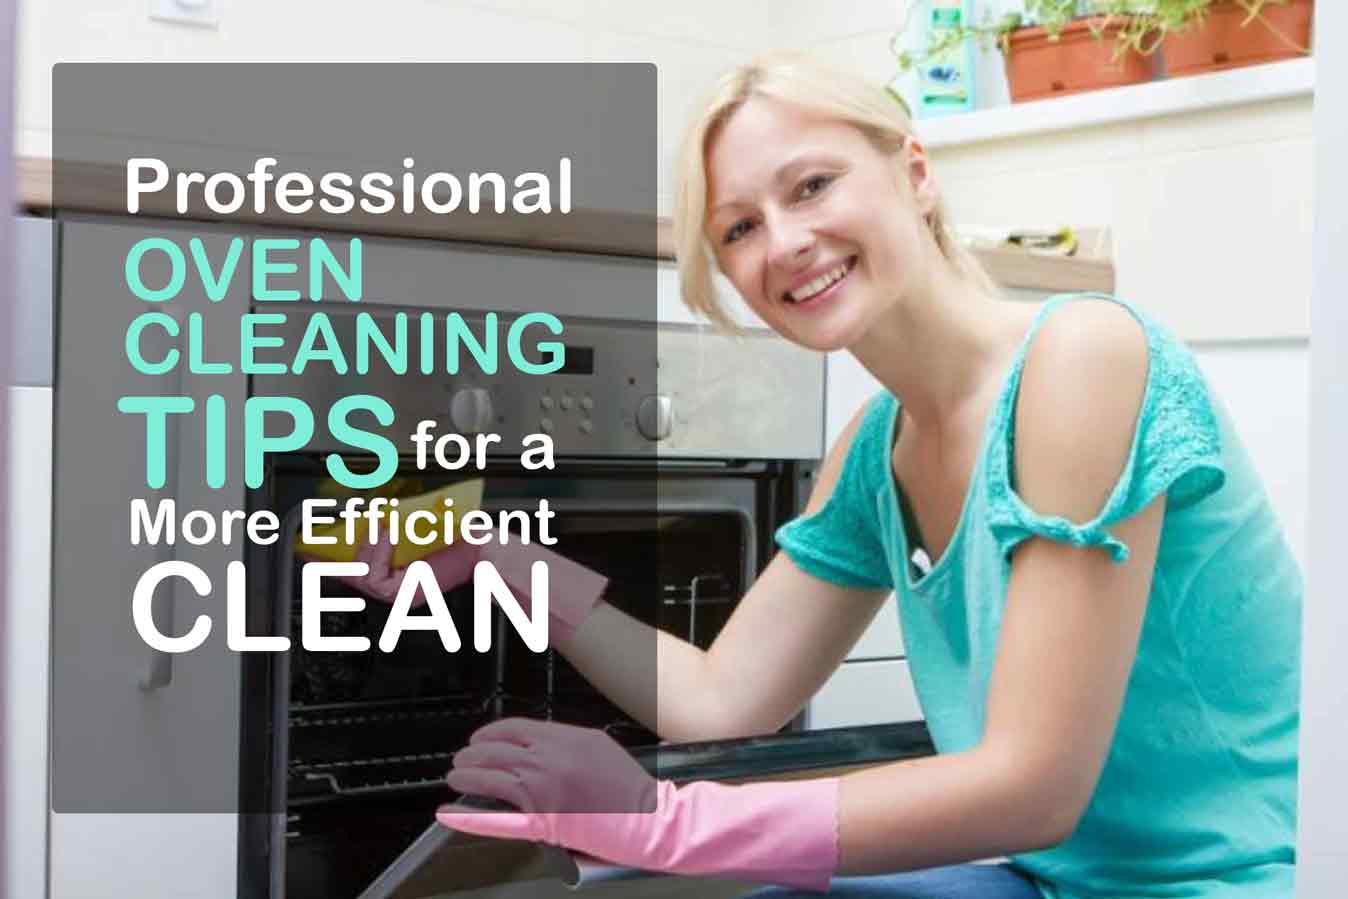 Professional Oven Cleaning Tips for A More Efficient Clean